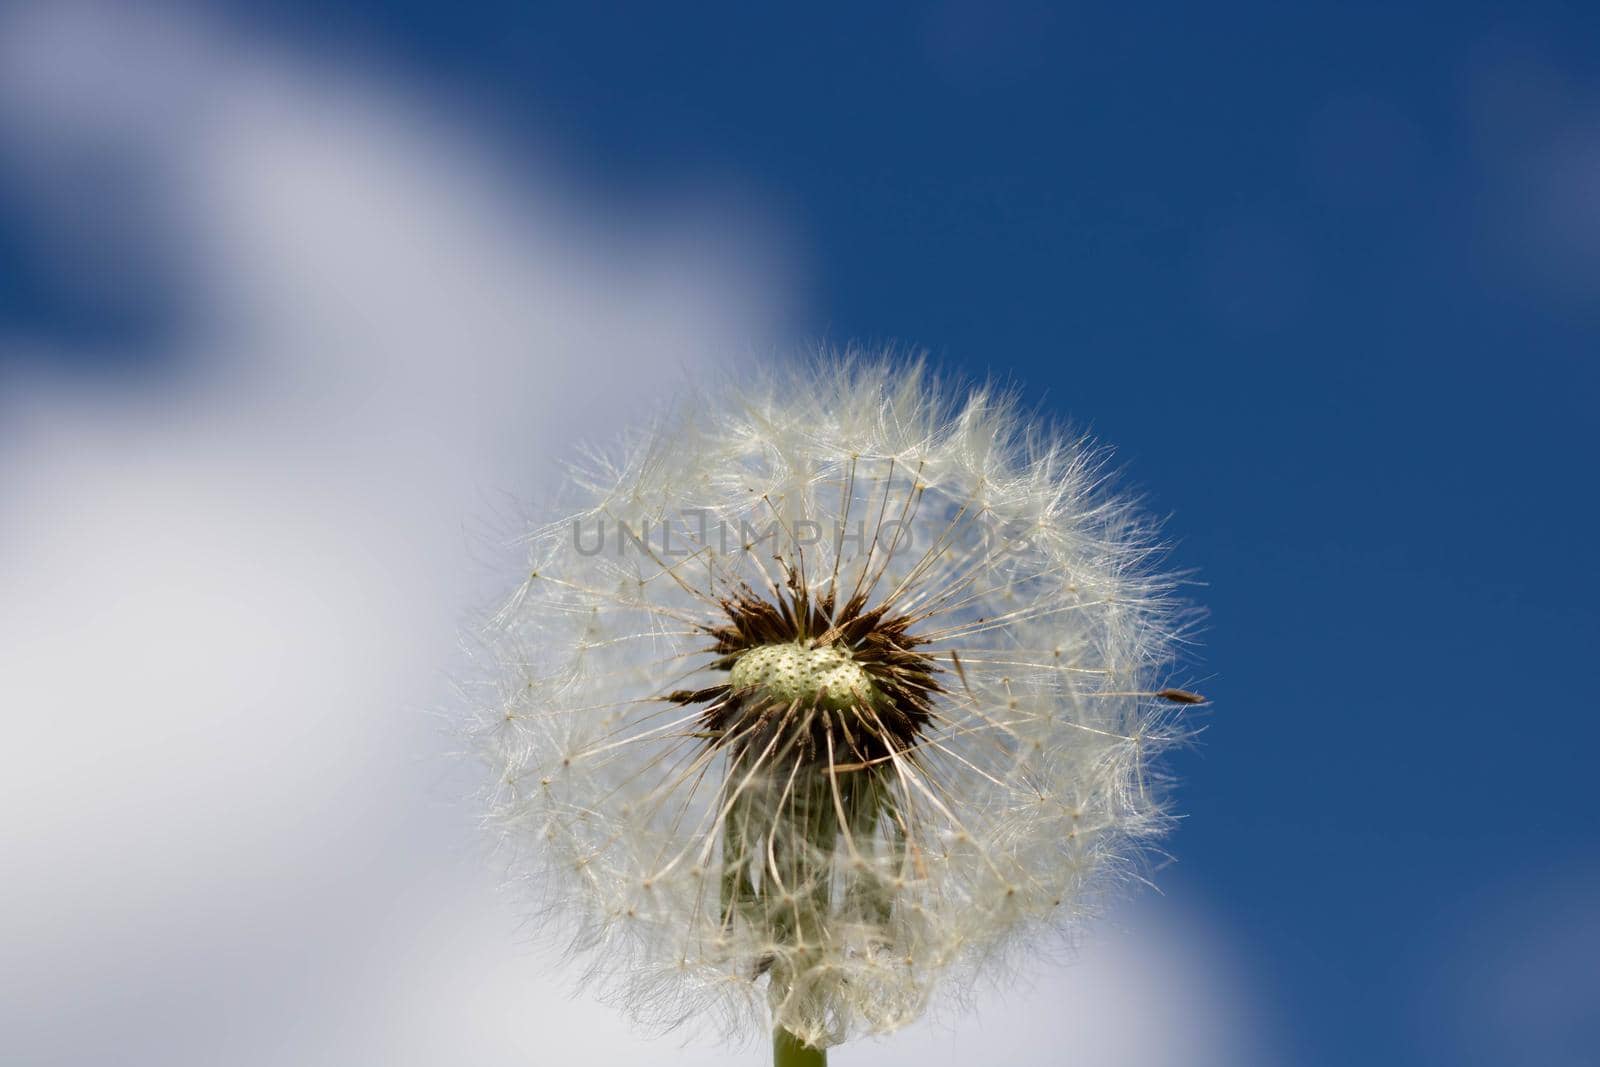 White fluffy dandelion with seeds, against a clear blue sky by lapushka62